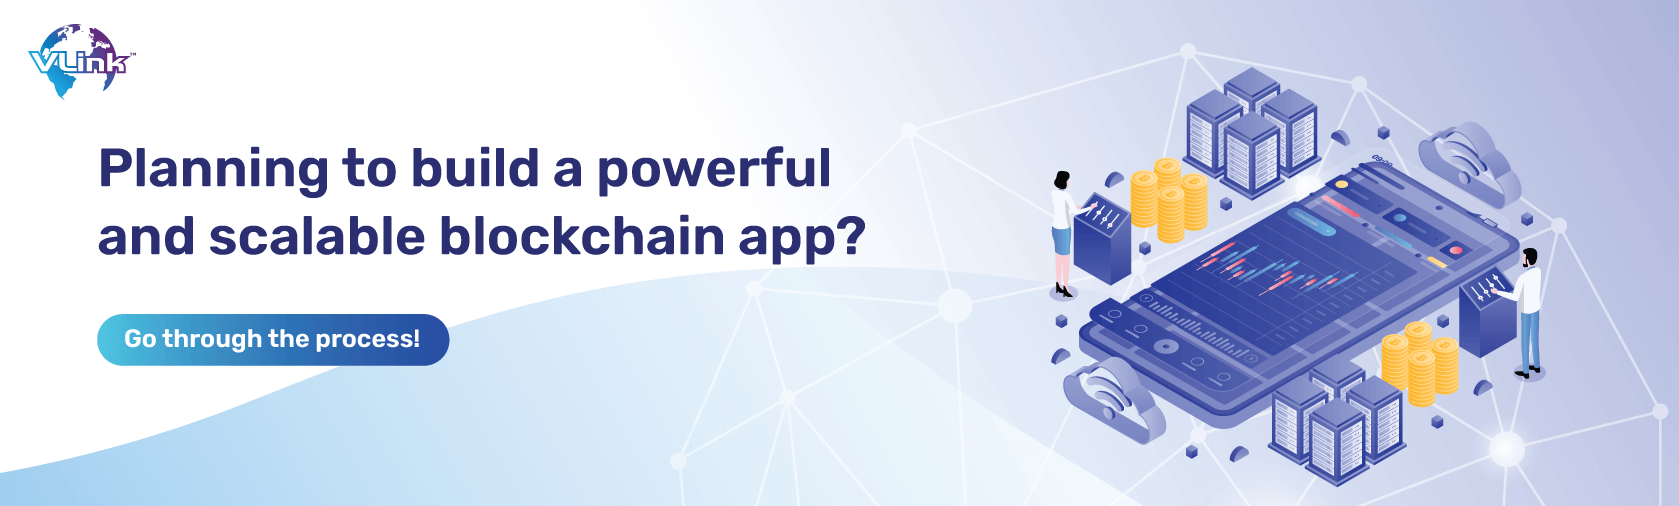 Planning to build a powerful and scalable blockchain app